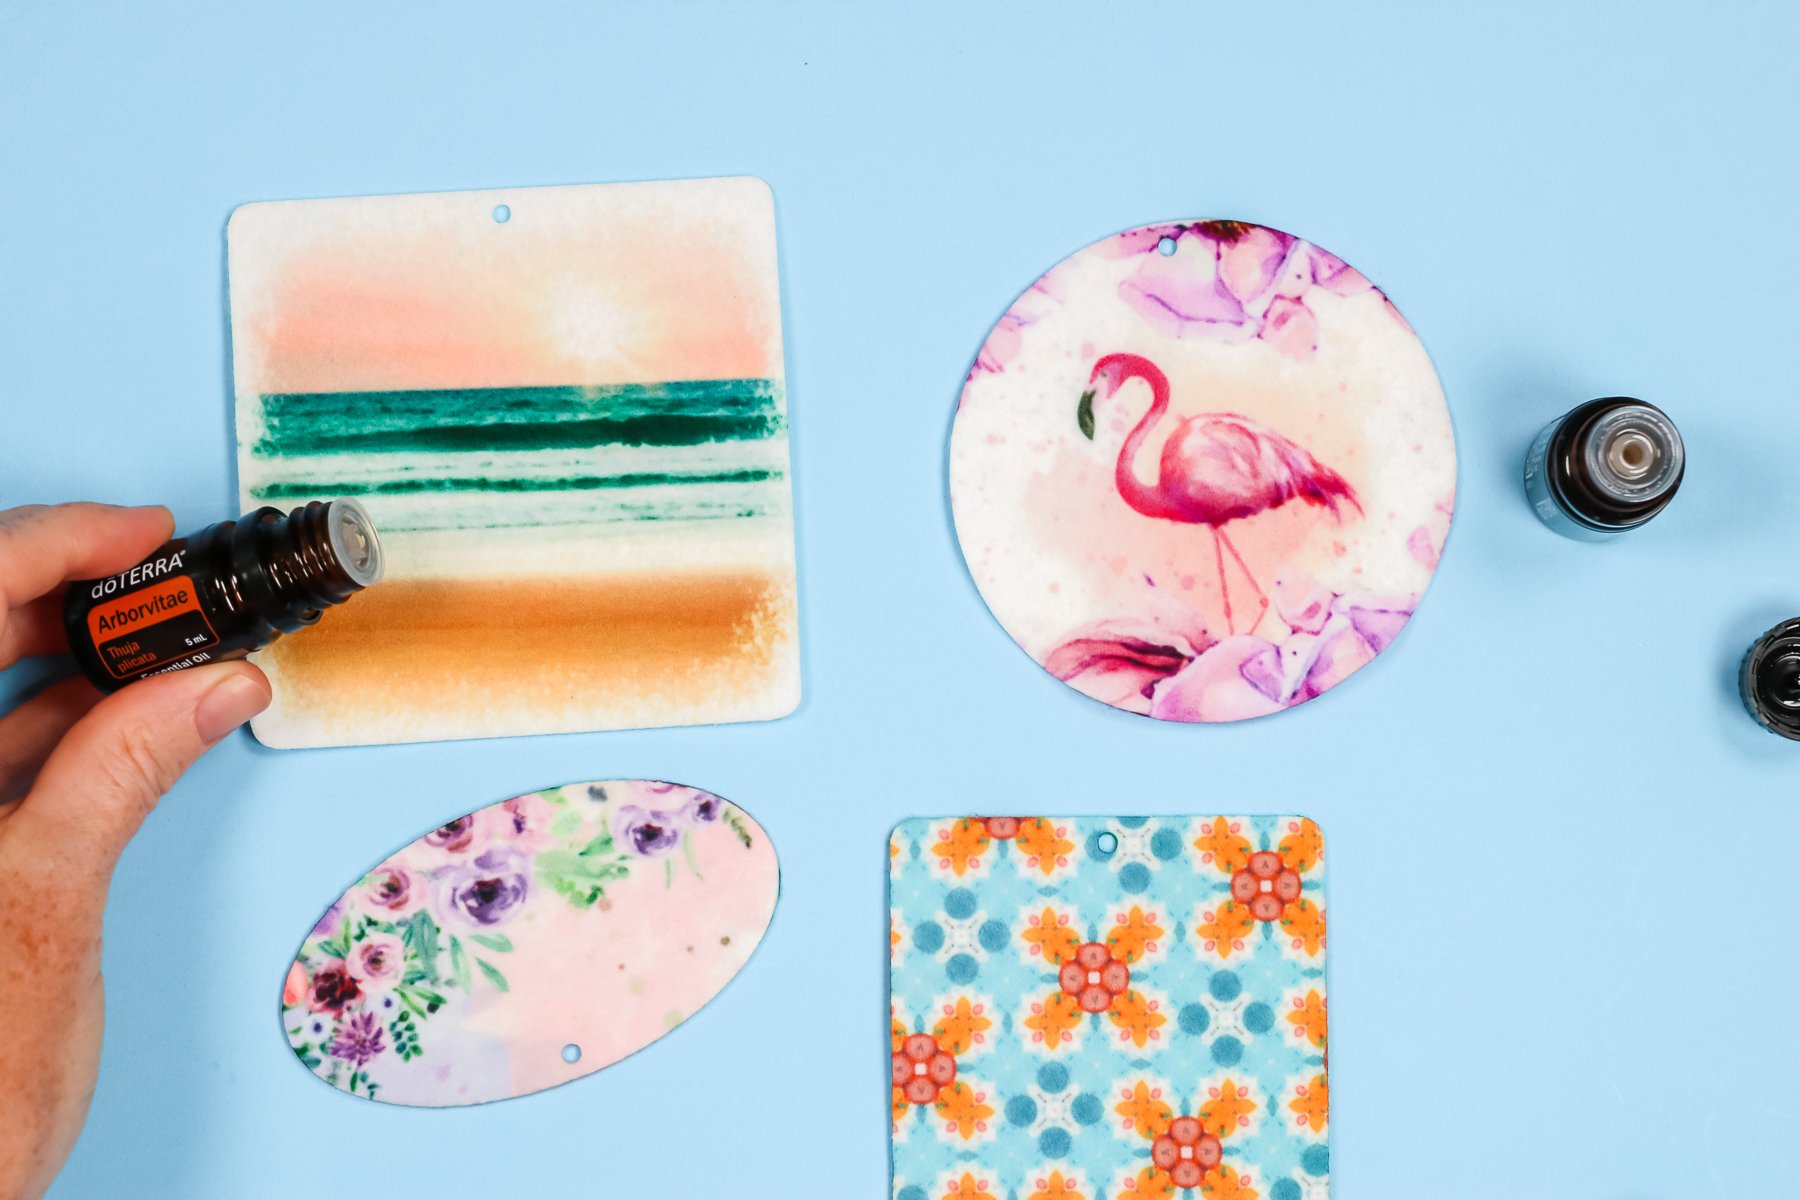 Applying fragrance to sublimation air fresheners.